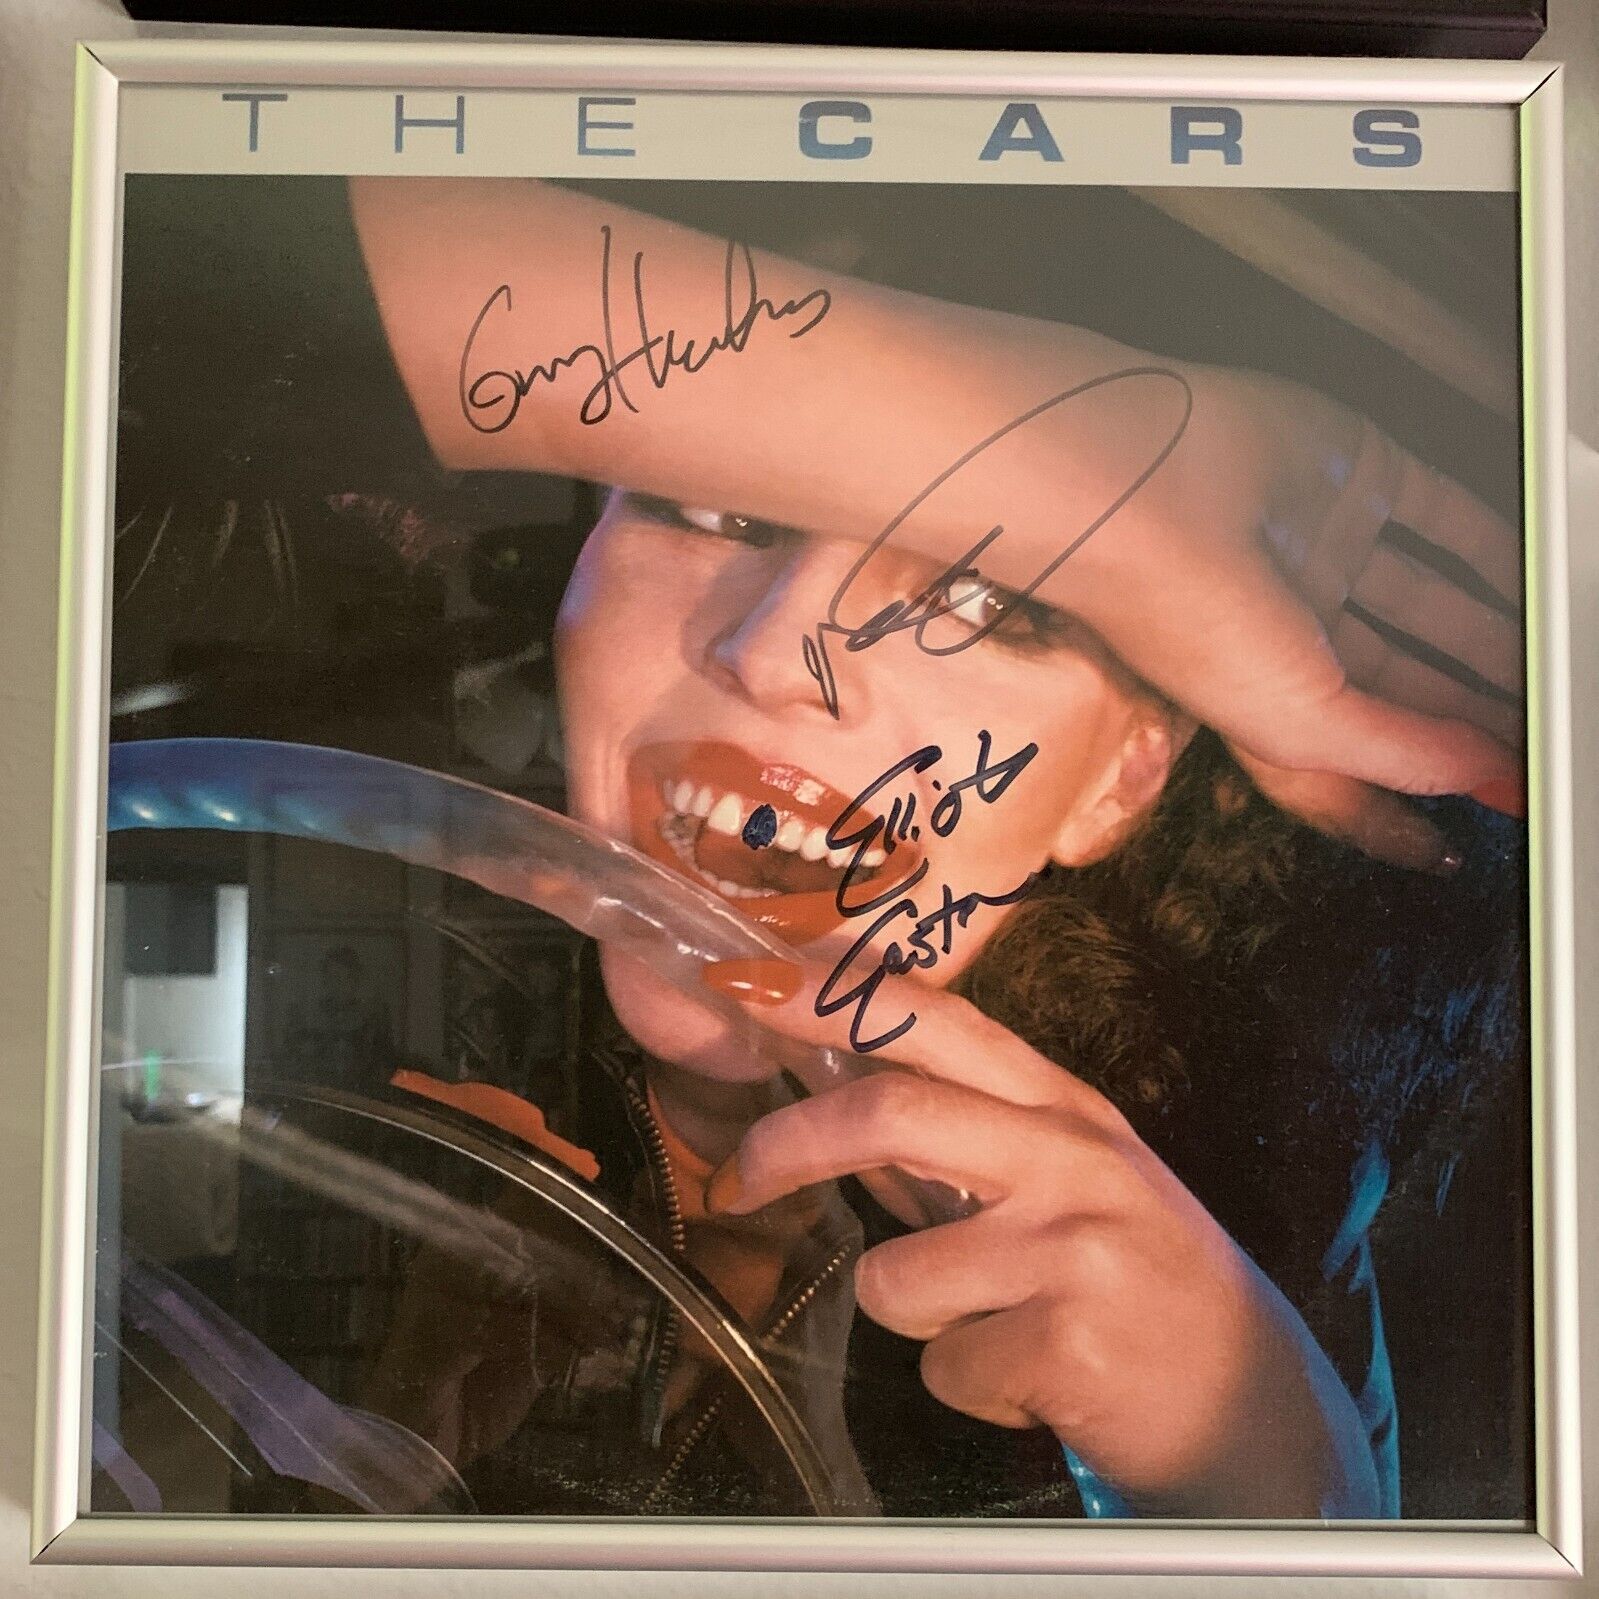 The Cars Autographed Vinyl LP Signed by Ric, Elliot and Greg